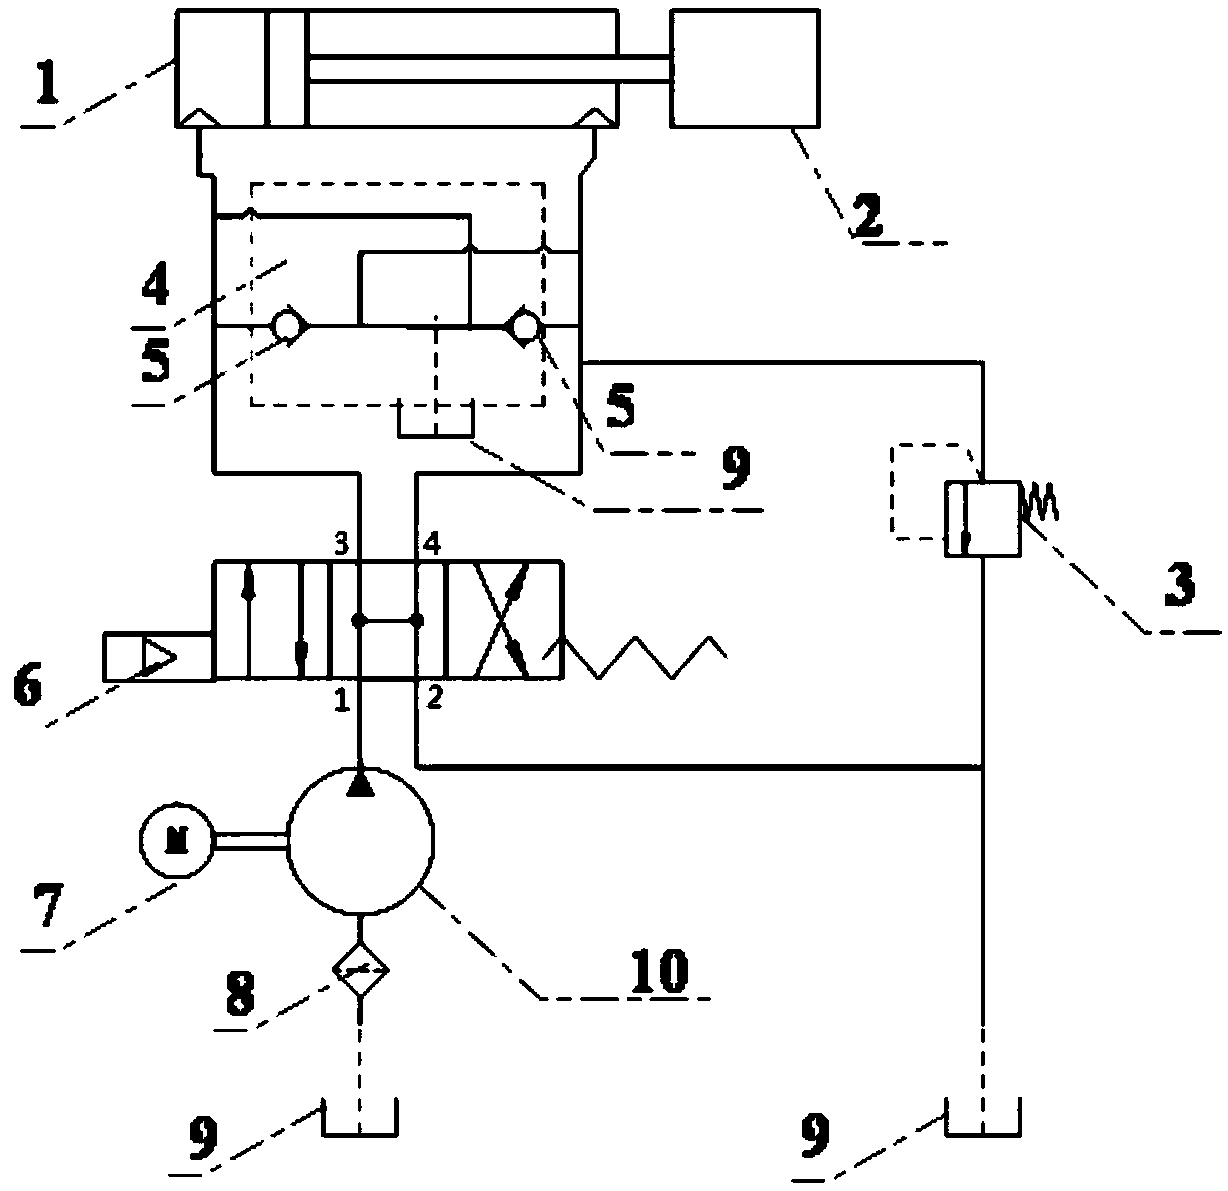 Hydraulic support platform stand column oil cylinder system controlled by proportional servo valve and pressure control method